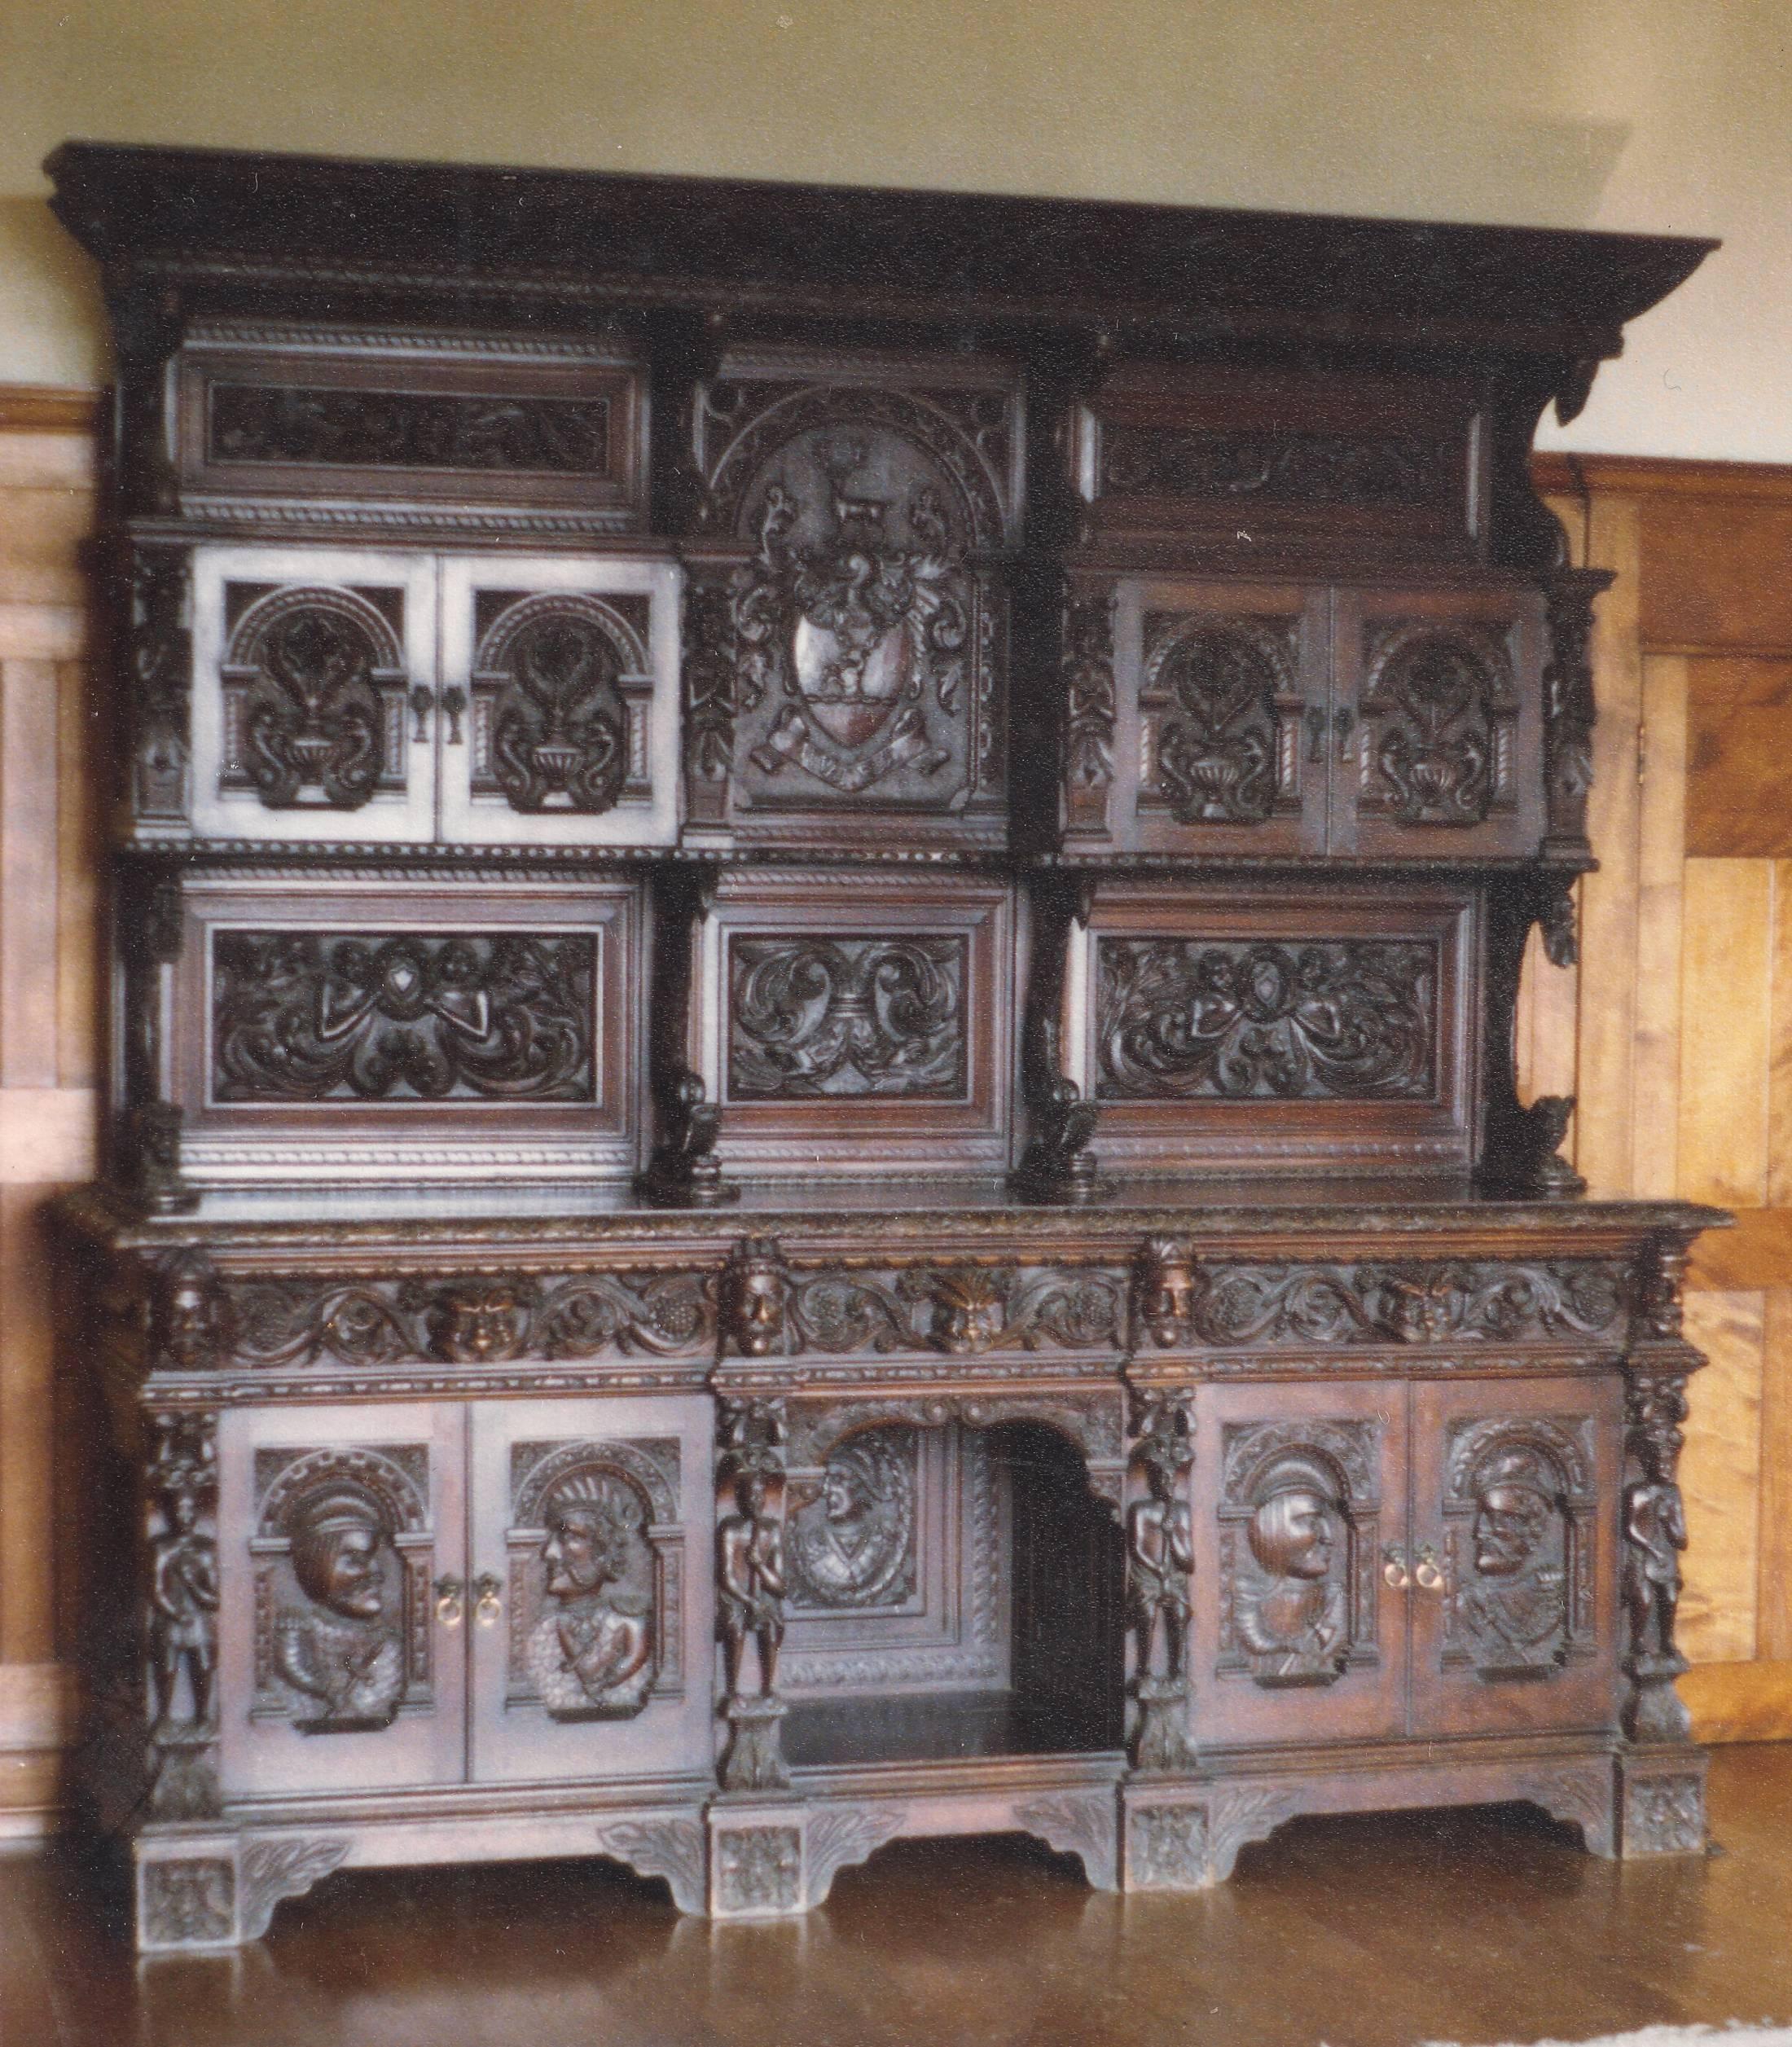 The McCorquodale crest and motto "Vivat Rex" prominently adorning the principal panel, between the two upper cupboards. The four lower doors display Scottish clansmen with a portrait of an unarmed figure, within the "kneehole" in